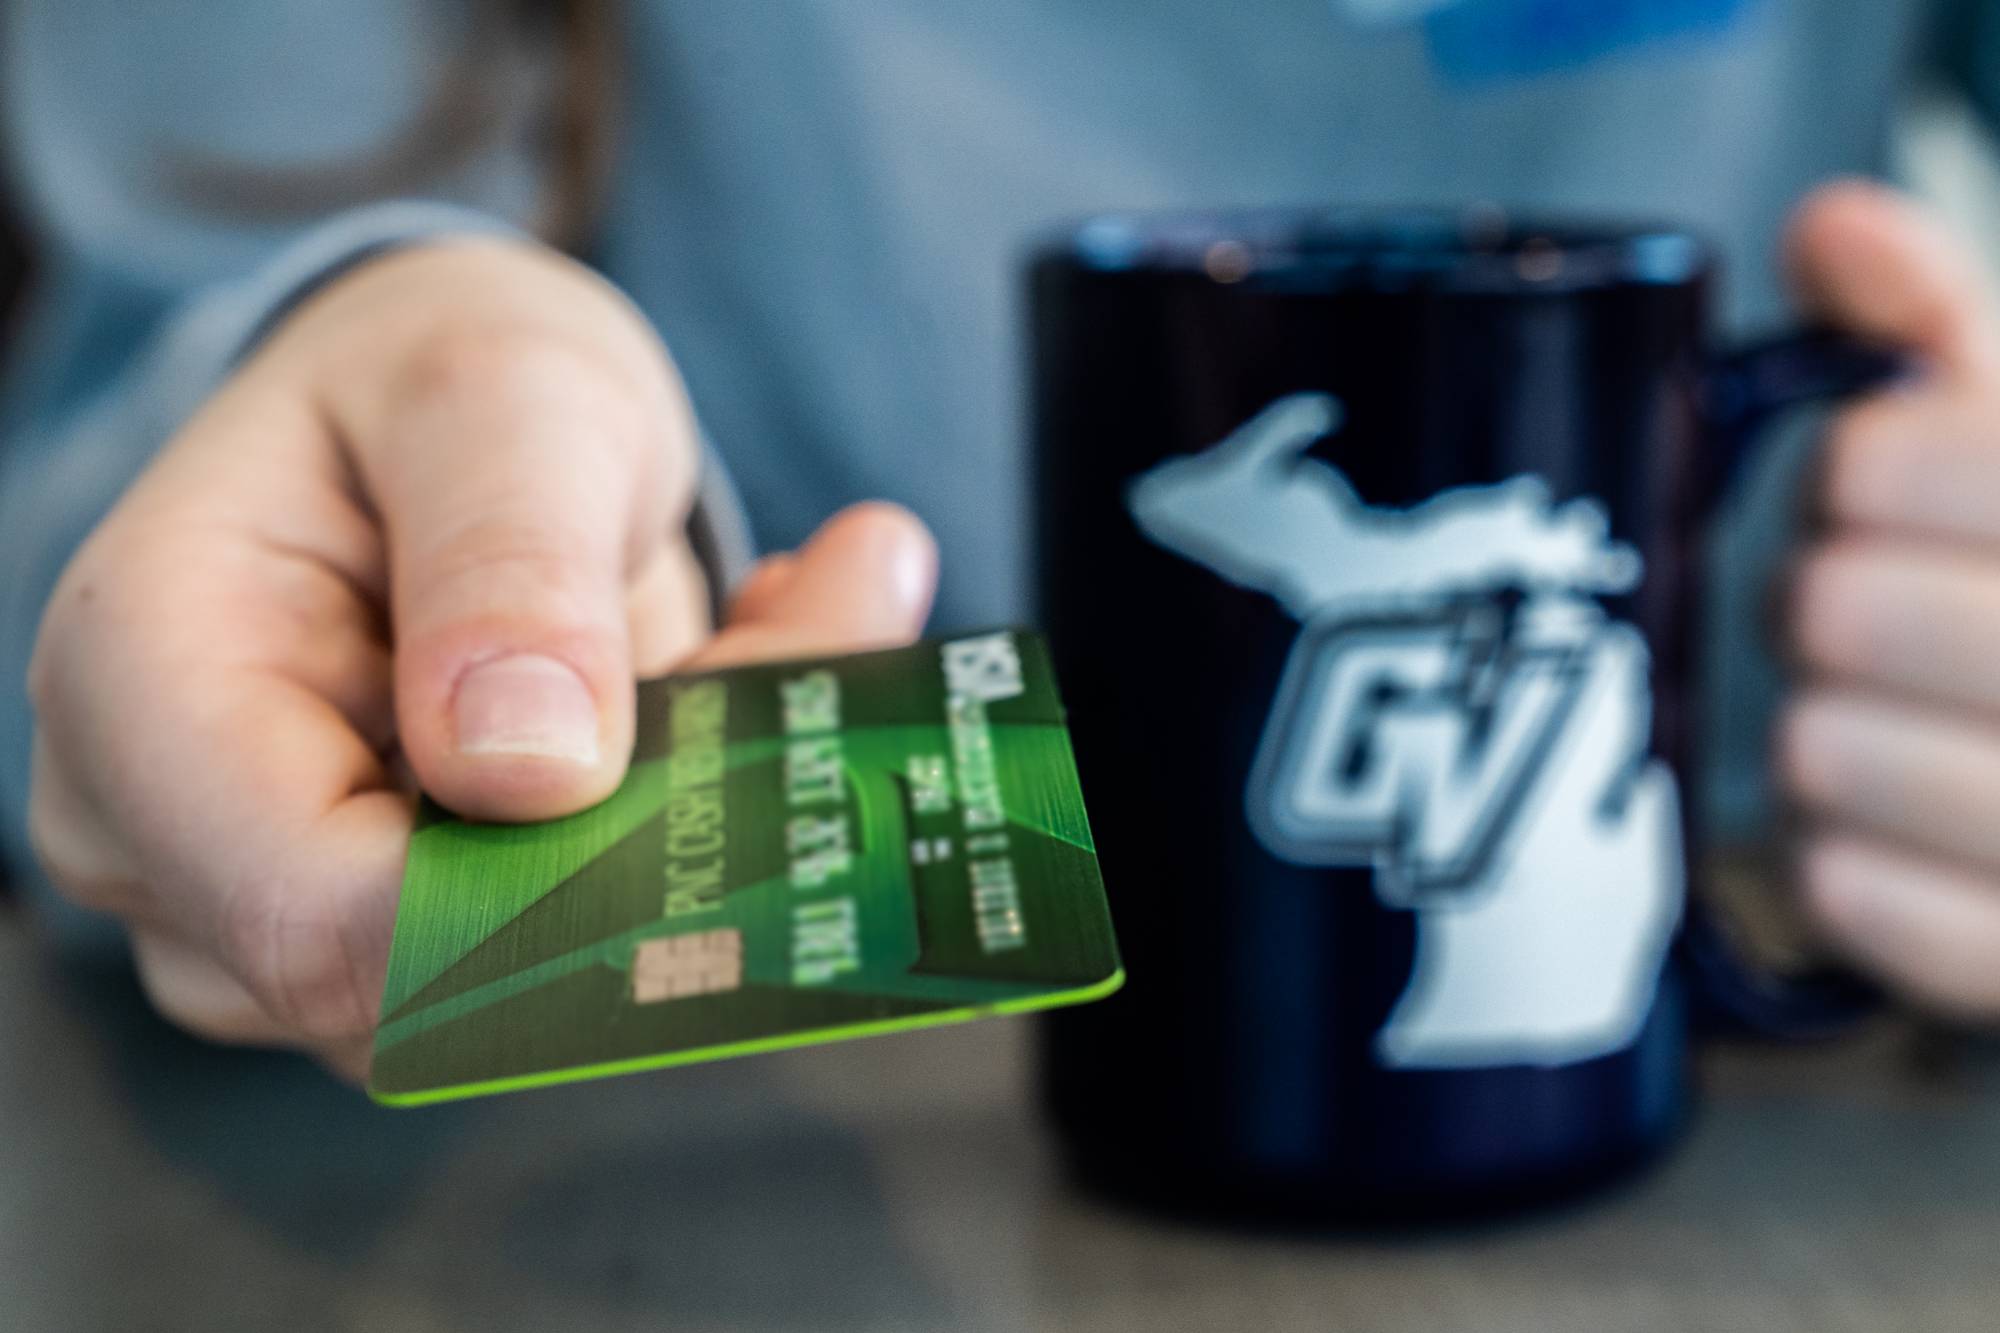 Hand presenting credit card while other hand is holding a GVSU coffee mug